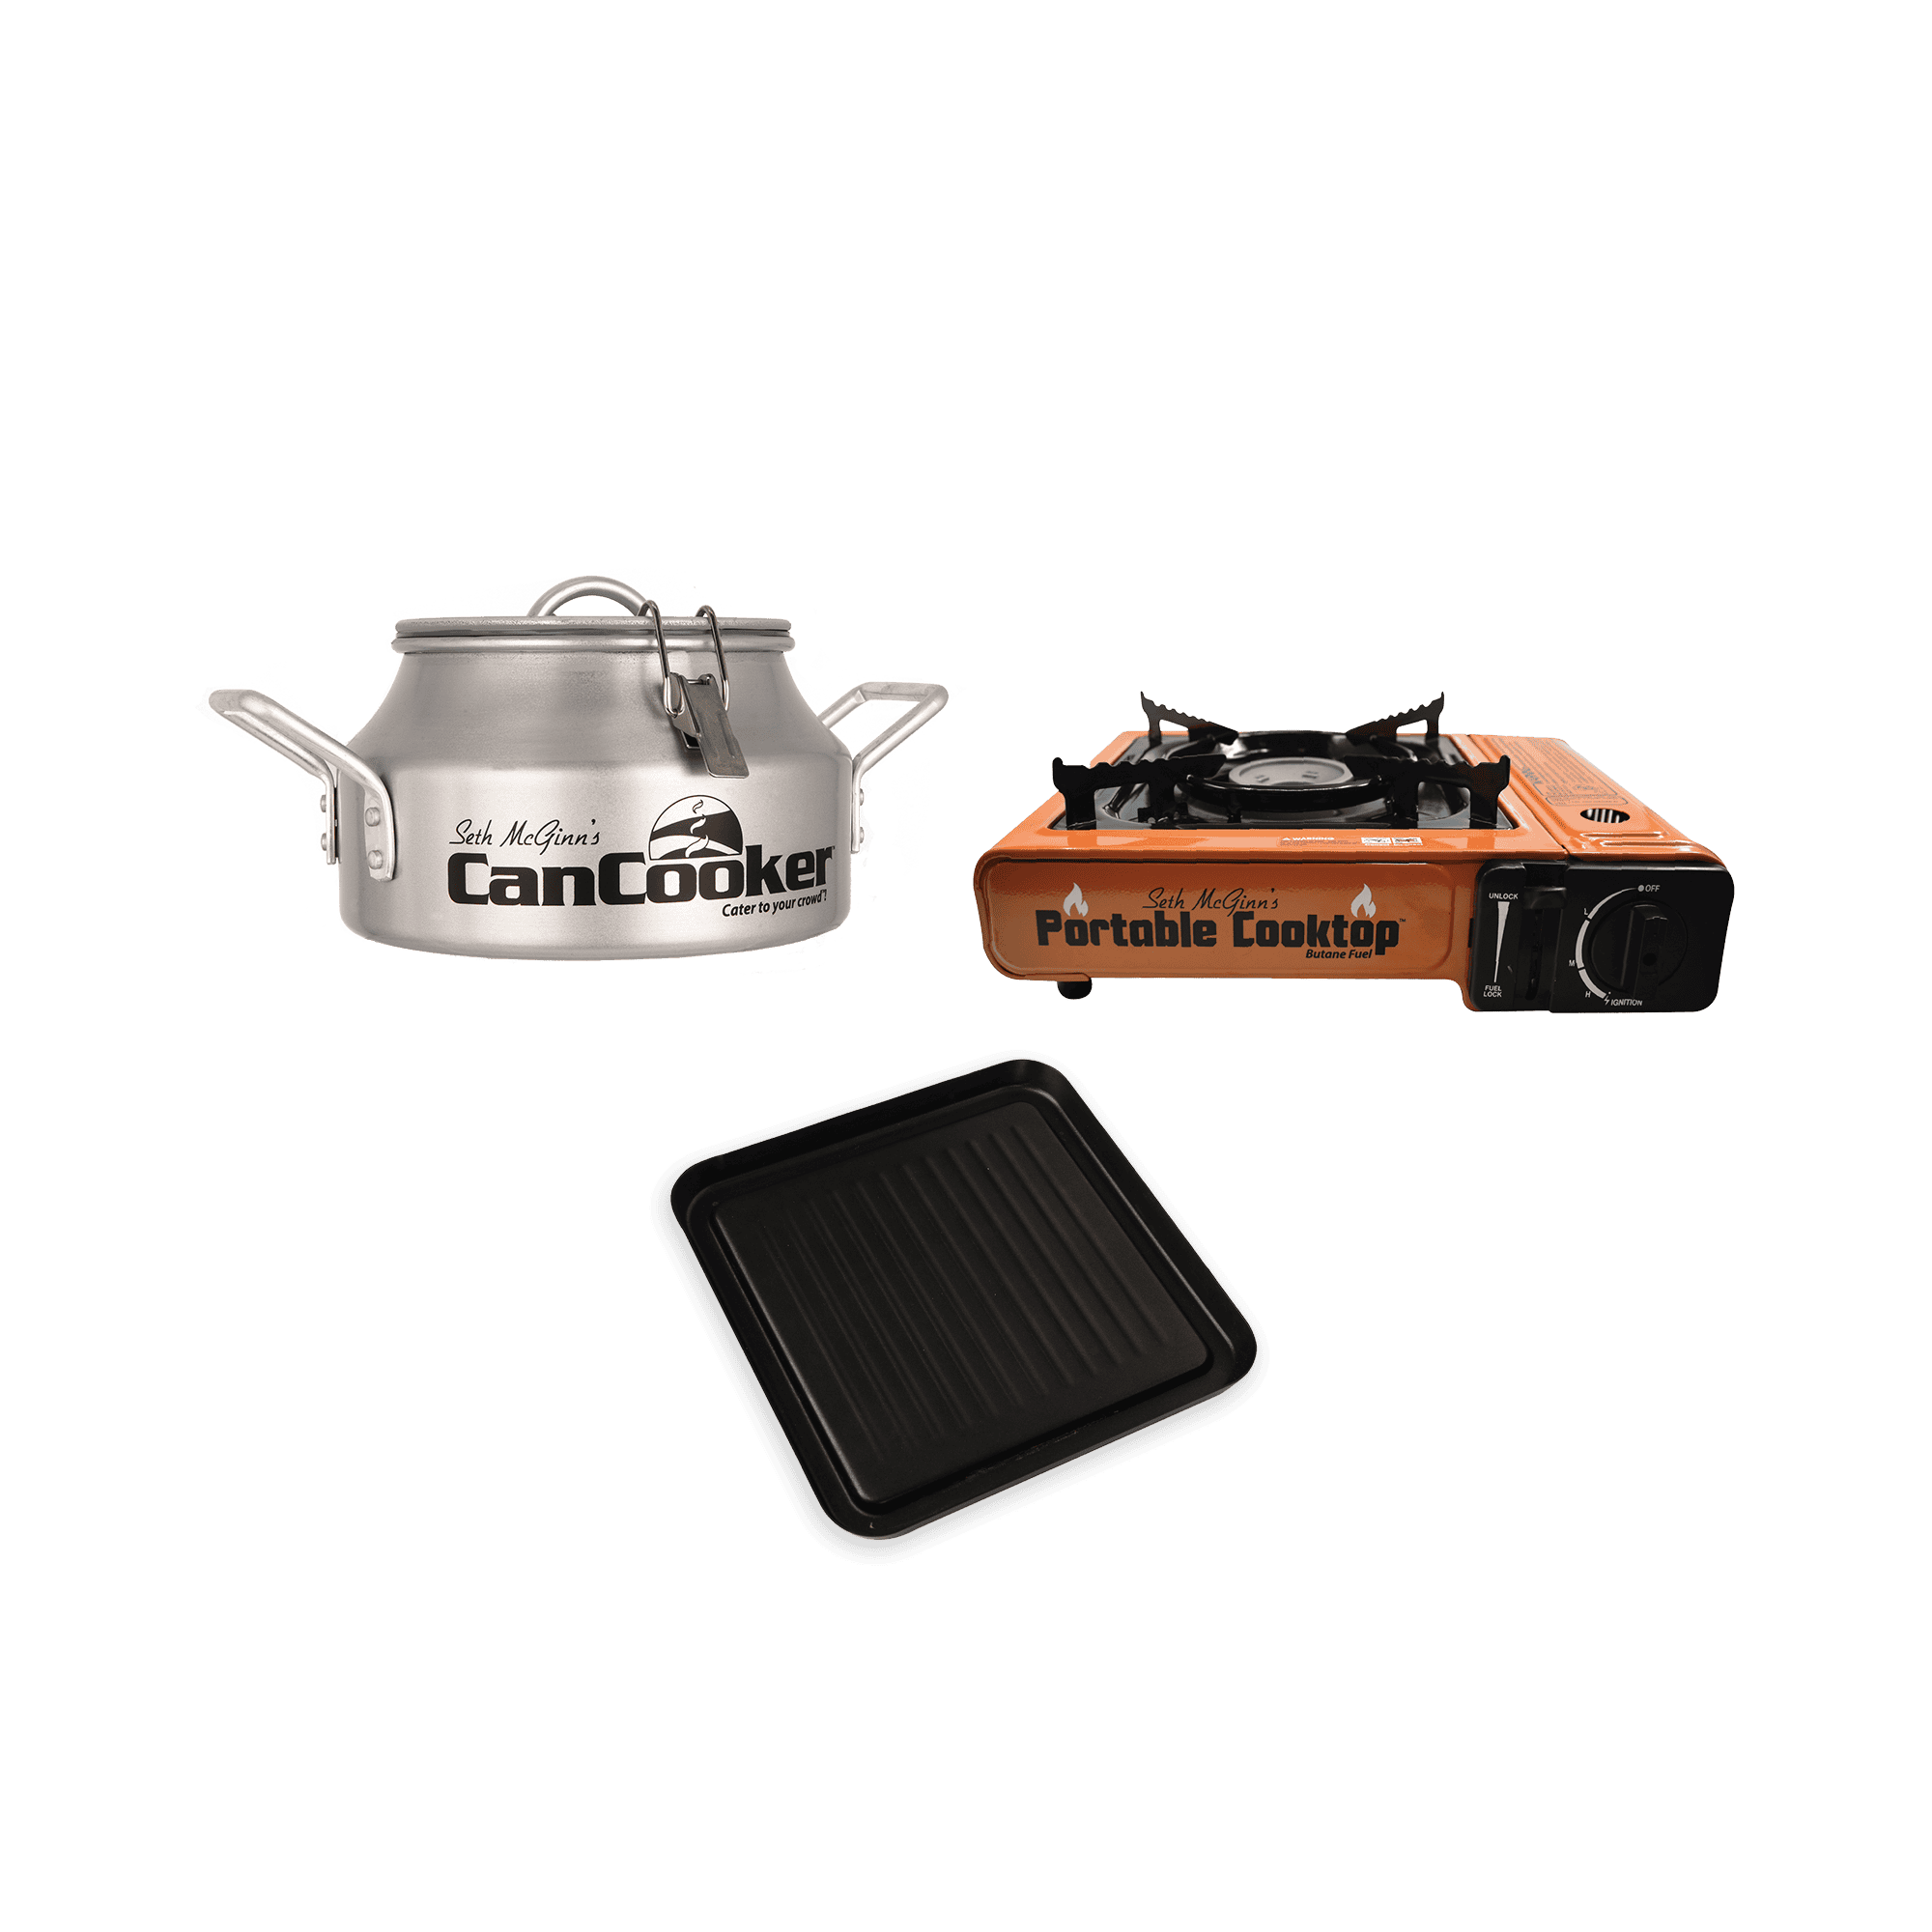 https://www.cancooker.com/wp-content/uploads/2023/06/CanCooker-Kit2-CampanionPortableCooktopGriddle.png